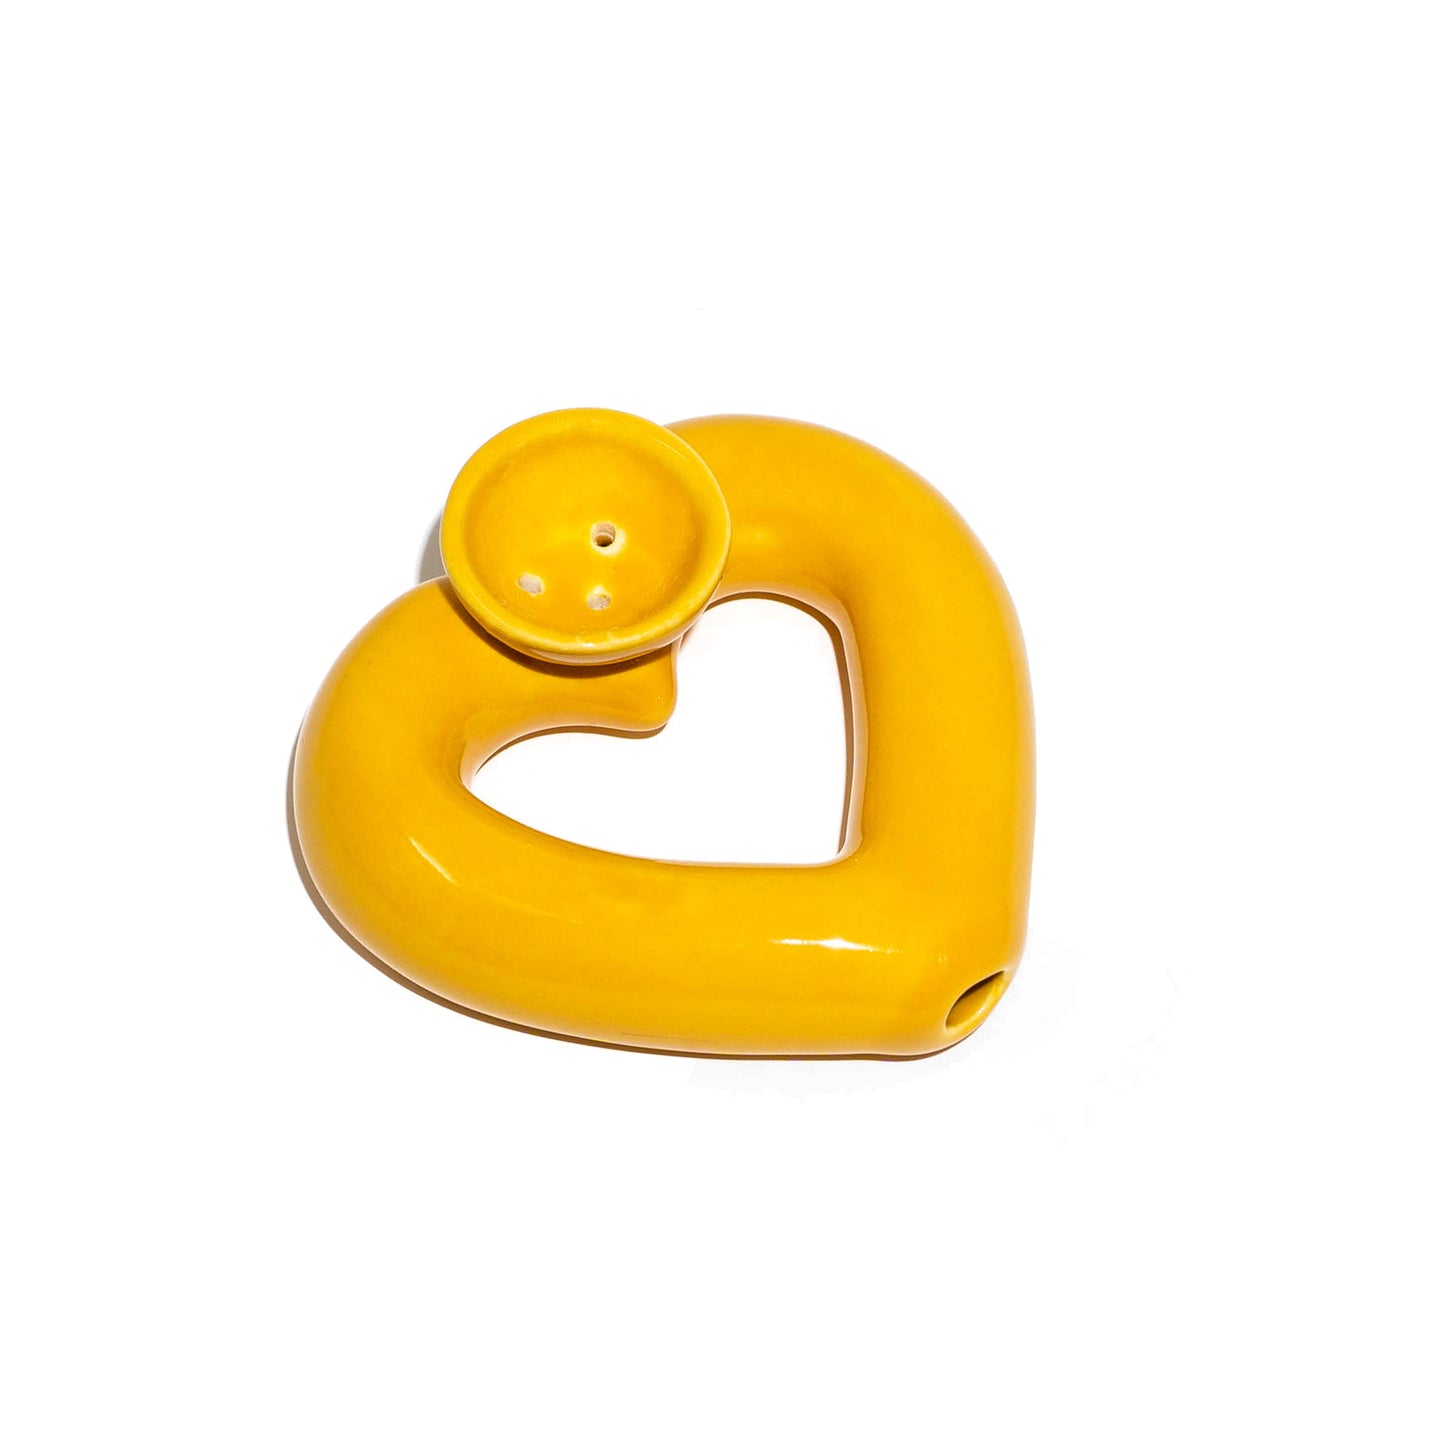 YELLOW BURNING UP 4 UR LOVE HEART TOBACCO PIPE